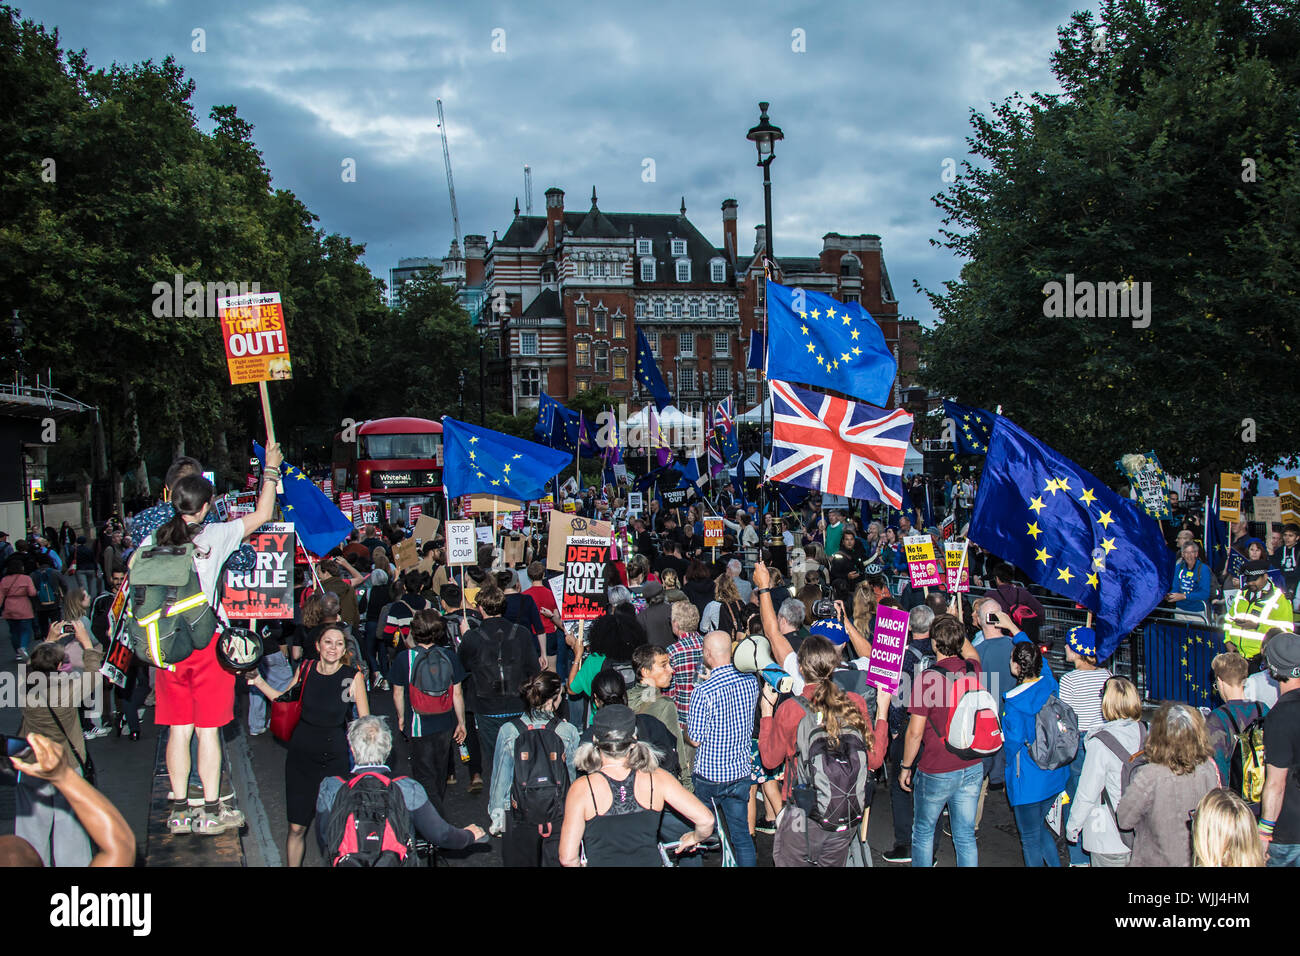 London, UK. 3 September, 2019. Protests against the Boris Johnson Government’s decision to Prorogue Parliament continue in Whitehall as MP’s vote to take control of Parliament business to attempt to stop a no deal crash out of Europe on 31 October. David Rowe/Alamy Live News. Stock Photo